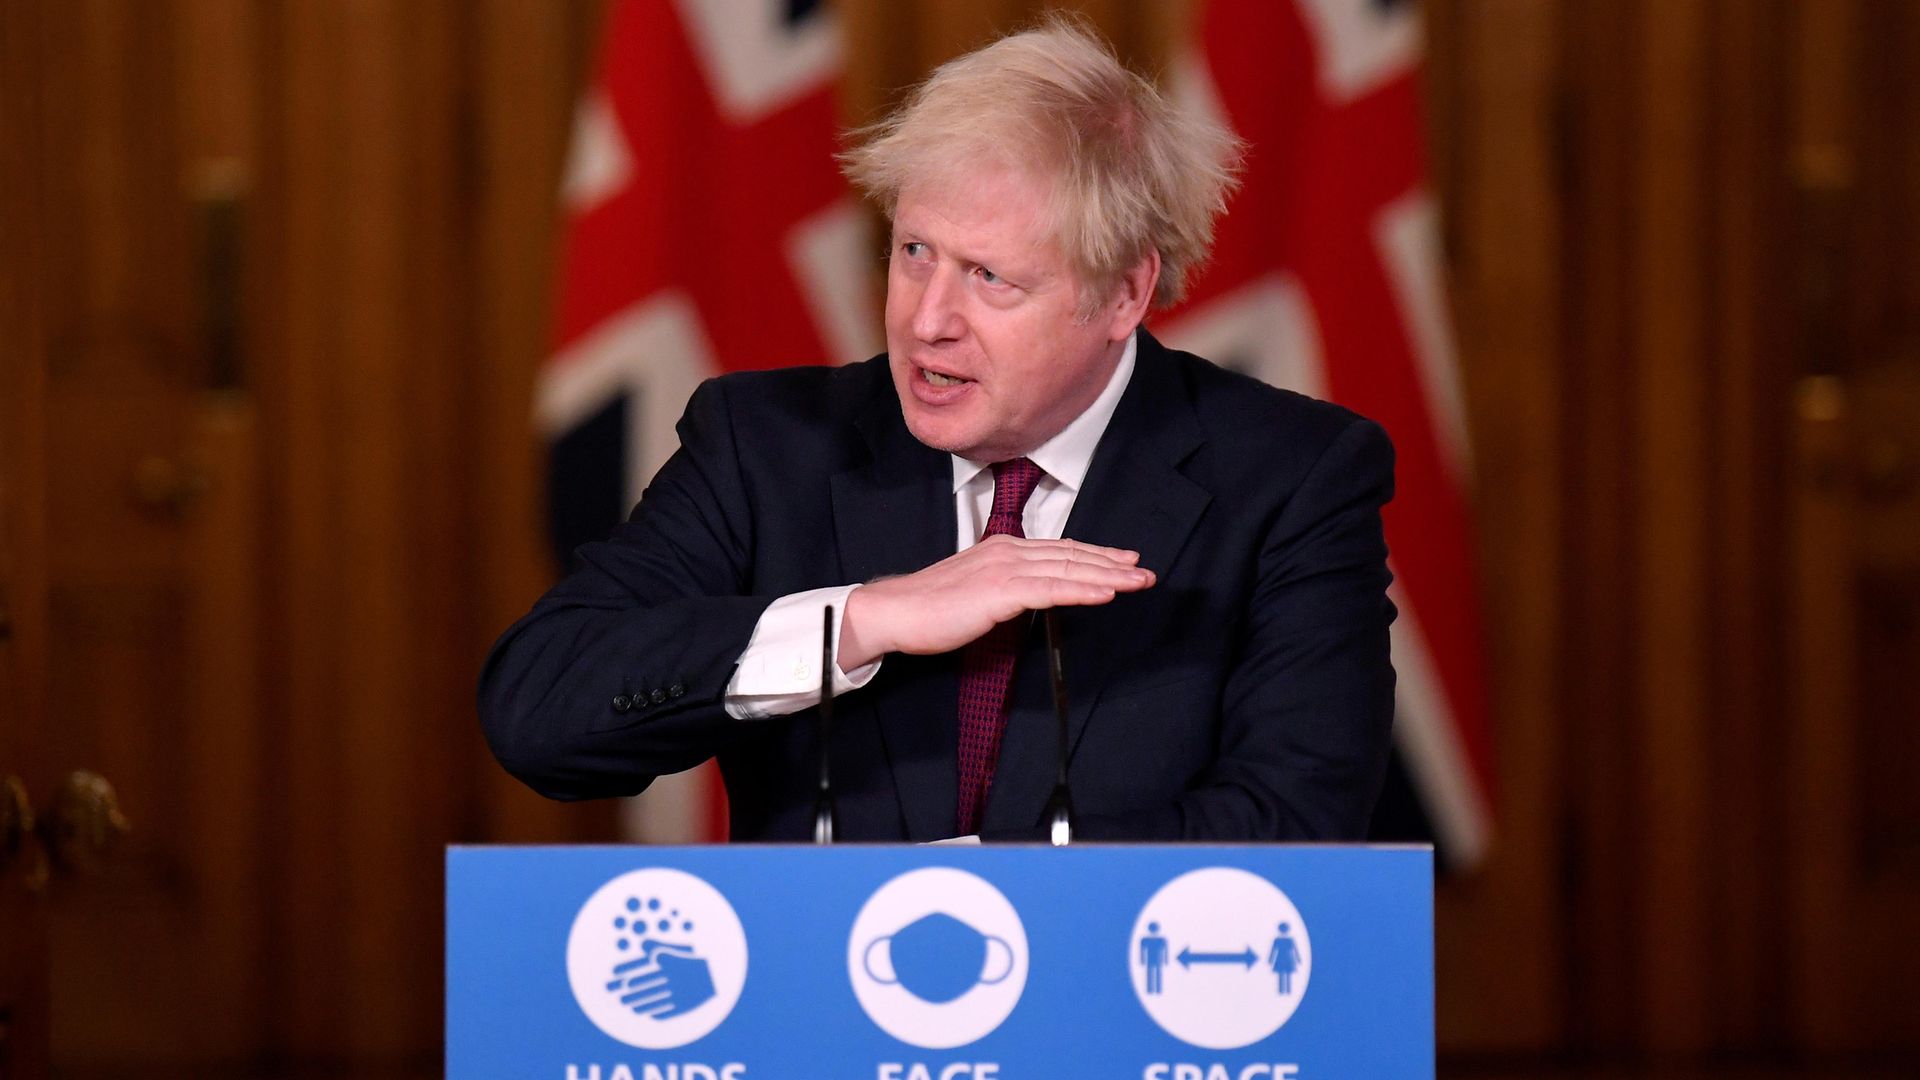 Prime Minister Boris Johnson speaks during a news conference in response to the ongoing situation with the Covid-19 pandemic, at 10 Downing Street, London. - Credit: PA